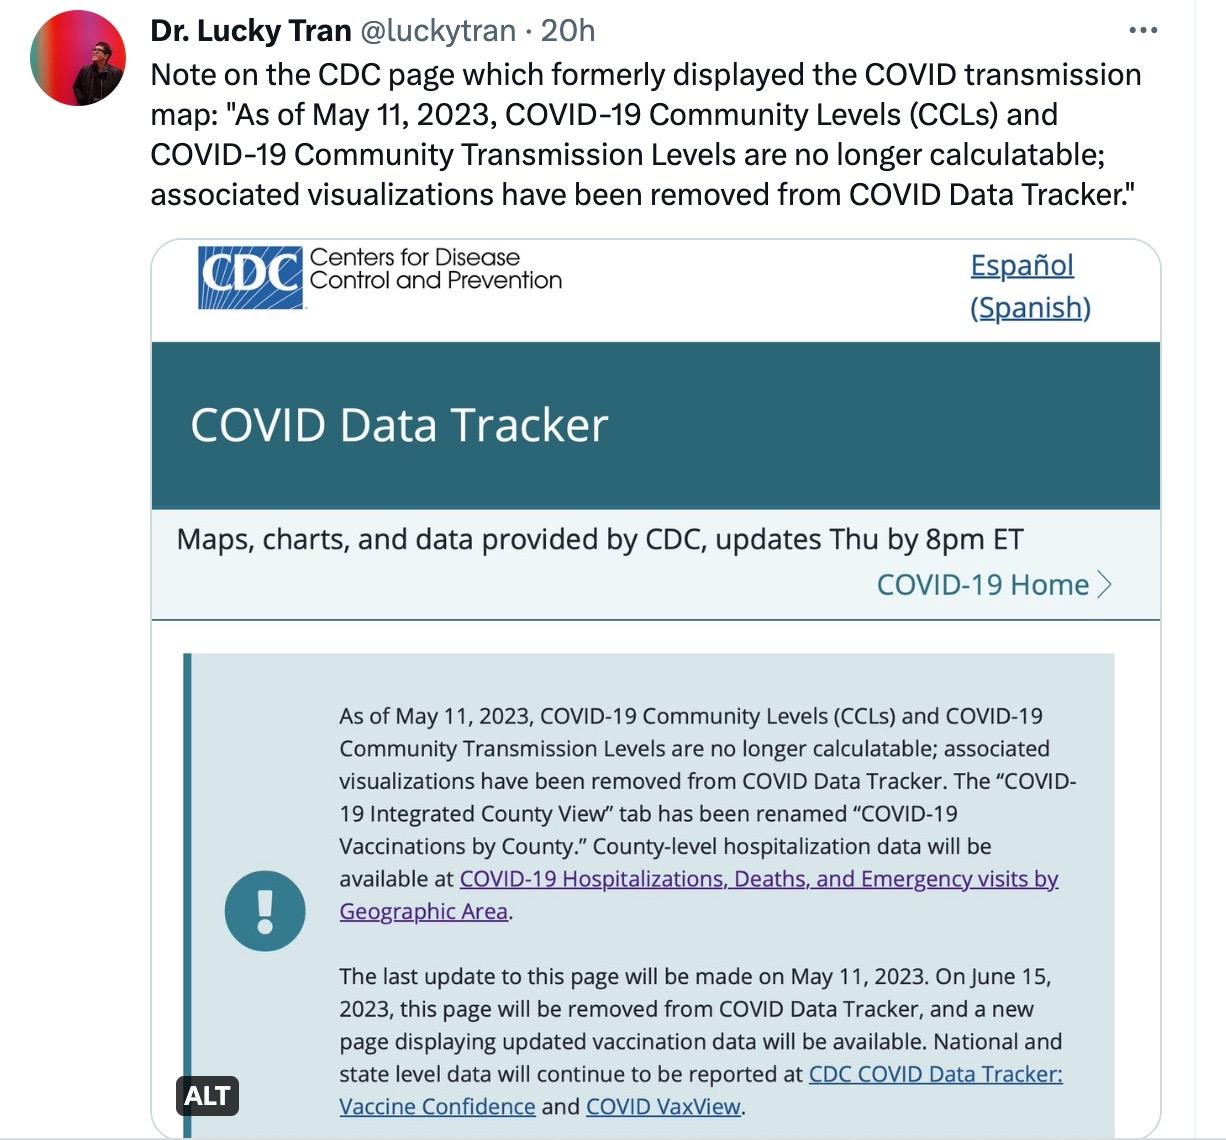 A screenshot of a tweet from Dr. Lucky Tran, posted on May 11, 2023. The caption reads: "Note on the CDC page which formerly displayed the COVID transmission map: 'As of May 11, 2023, COVID-19 Community Levels (CCLs) and COVID-19 Community Transmission Levels are no longer calculatable; associated visualizations have been removed from COVID Data Tracker.'" Image: As of May 11, 2023, COVID-19 Community Levels (CCLs) and COVID-19 Community Transmission Levels are no longer calculatable; associated visualizations have been removed from COVID Data Tracker. The “COVID-19 Integrated County View” tab has been renamed “COVID-19 Vaccinations by County.” County-level hospitalization data will be available at COVID-19 Hospitalizations, Deaths, and Emergency visits by Geographic Area. The last update to this page will be made on May 11, 2023. On June 15, 2023, this page will be removed from COVID Data Tracker, and a new page displaying updated vaccination data will be available. National and state level data will continue to be reported at CDC COVID Data Tracker: Vaccine Confidence and COVID VaxView.